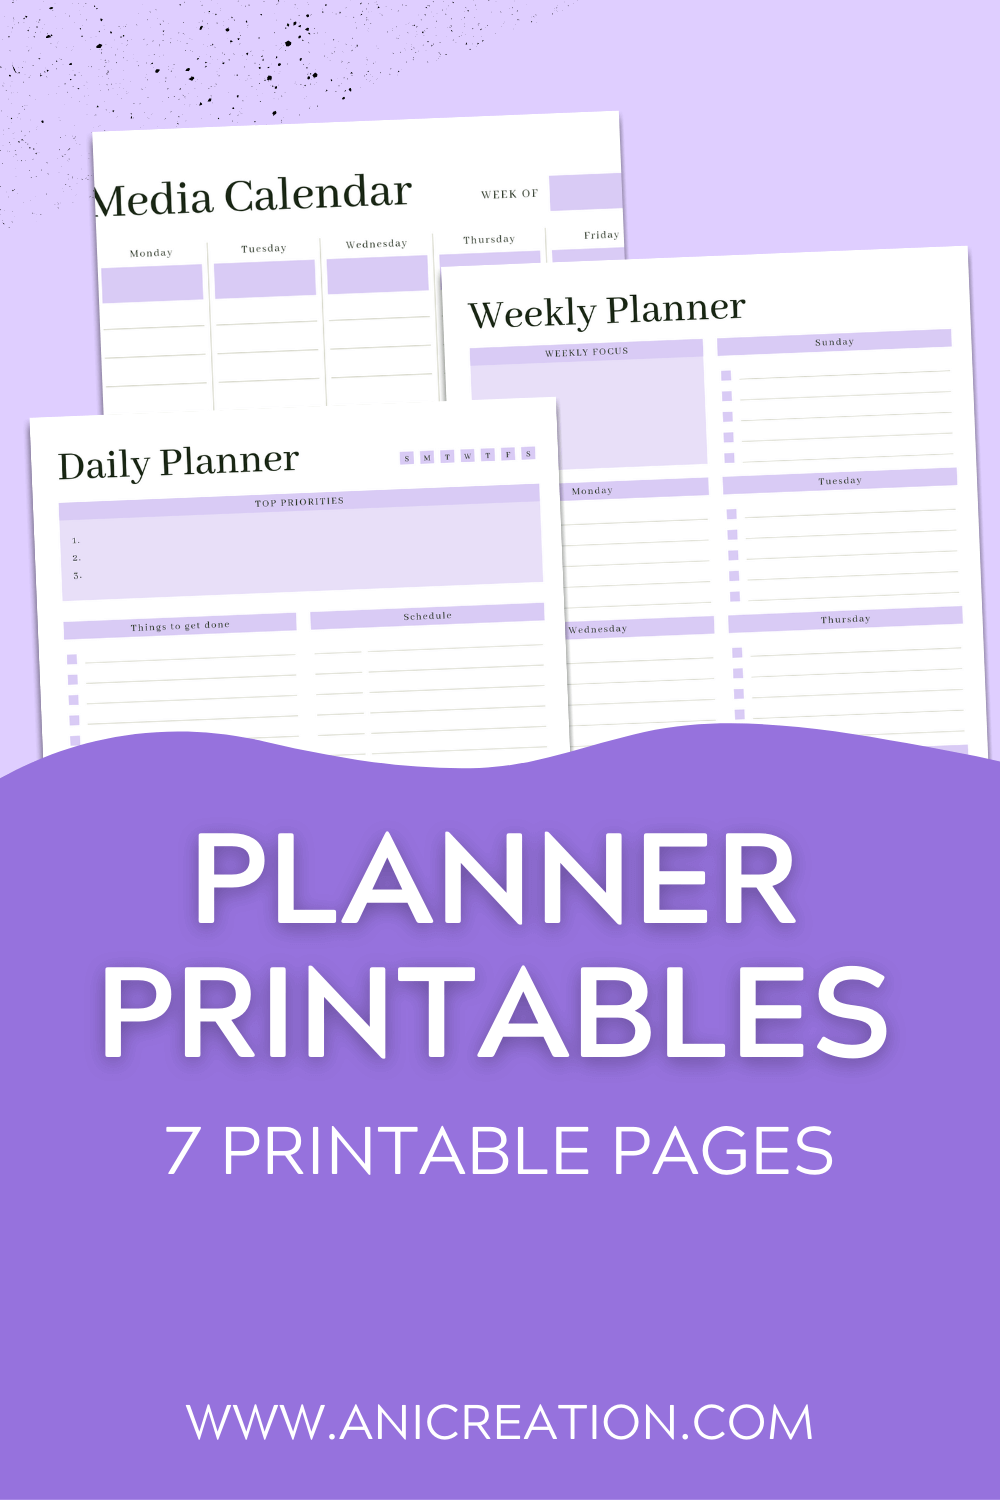 7 Free Planner printable pages for productivity